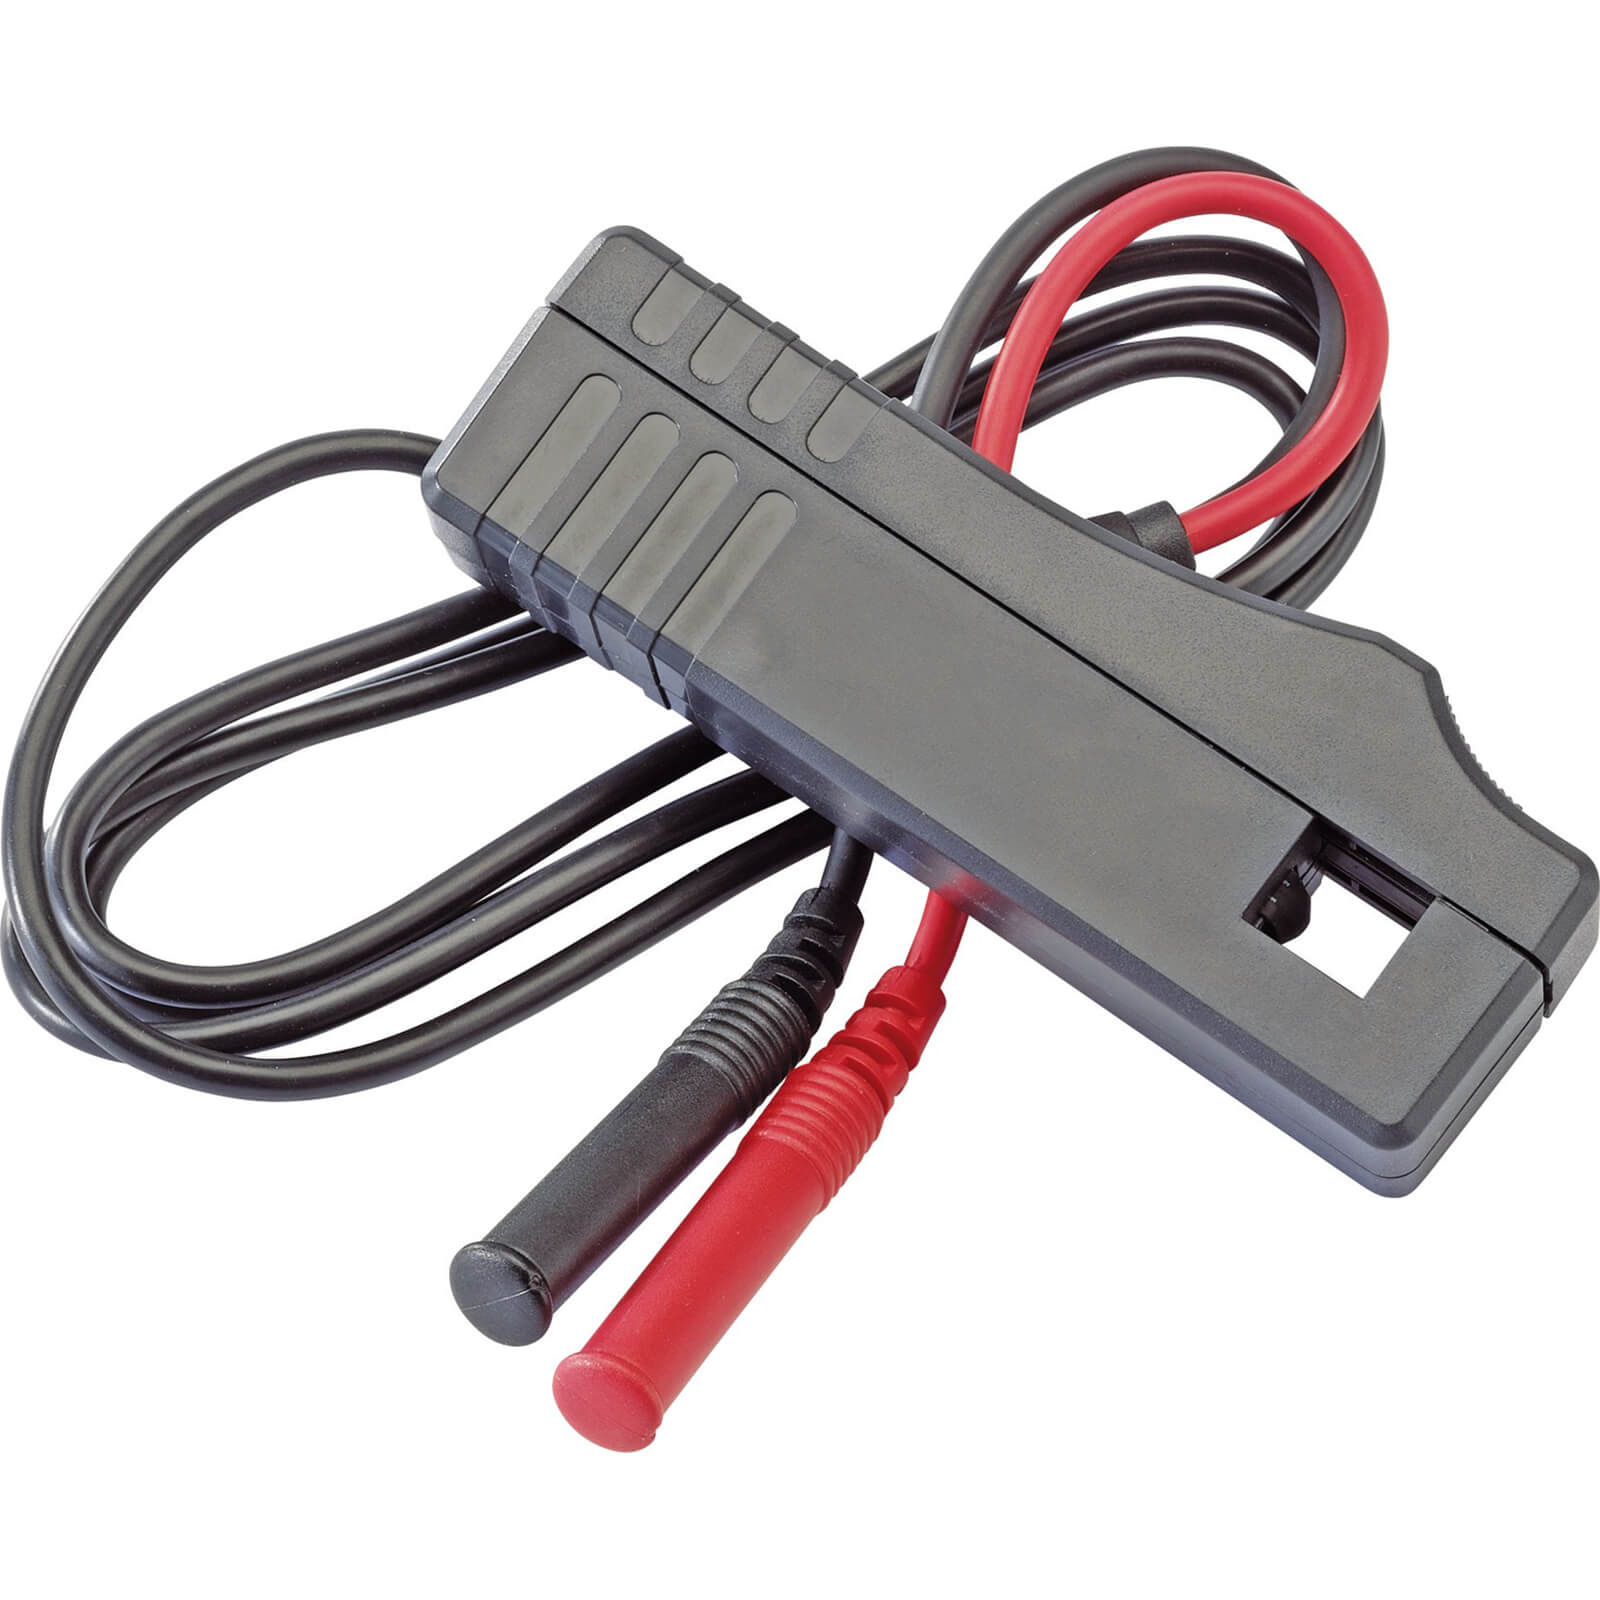 Image of Draper Inductive Clamp for 41821 and 41822 Multimeters